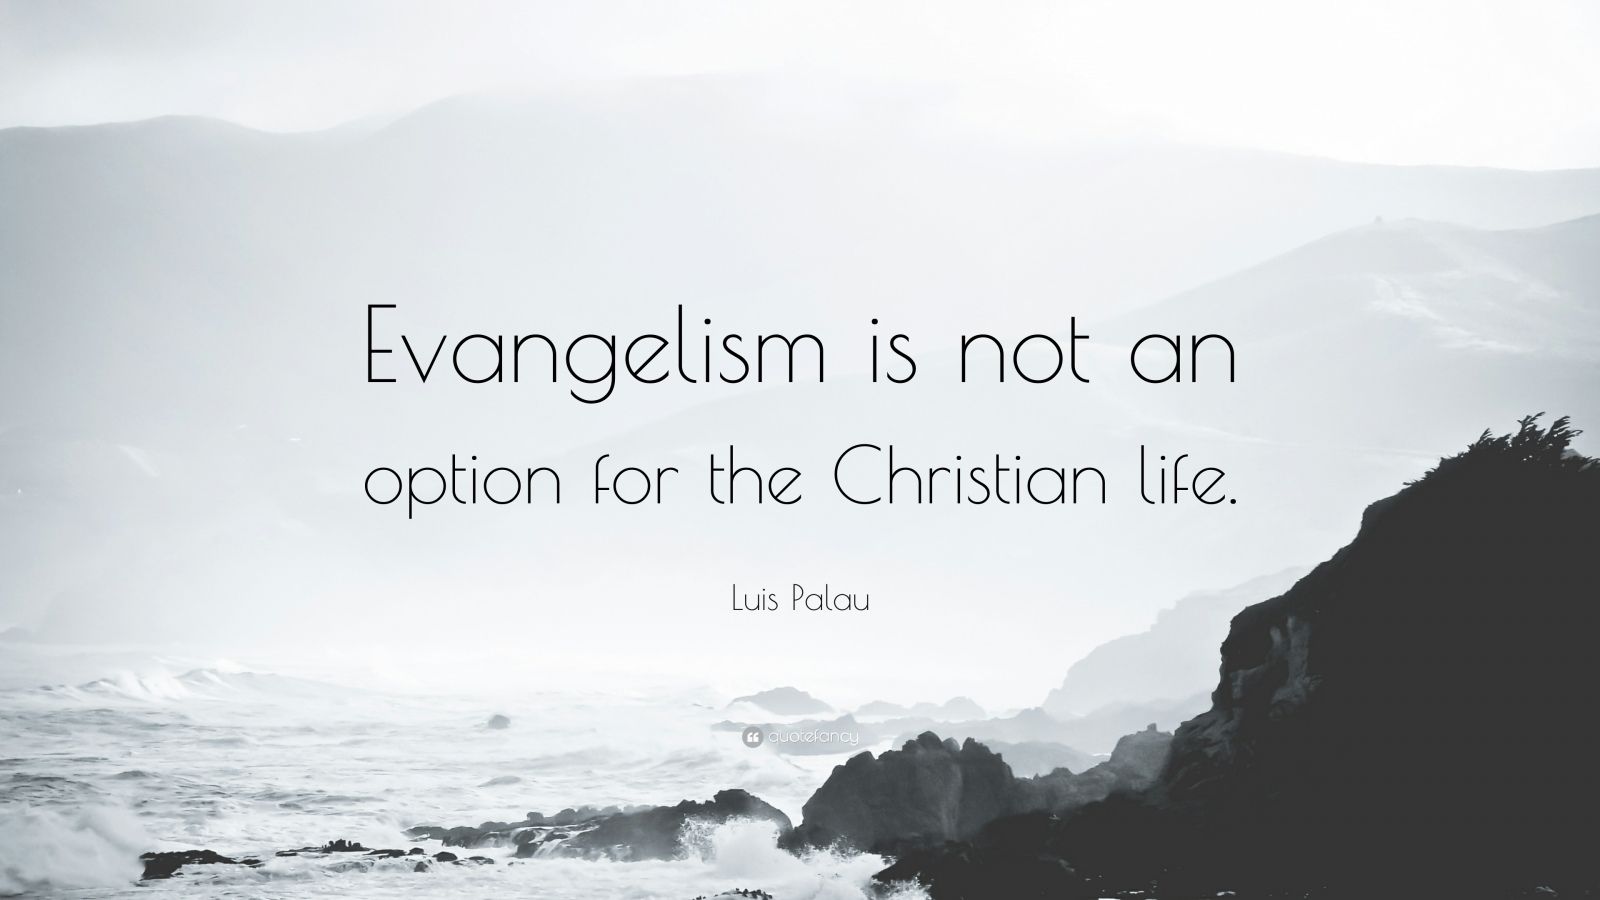 Luis Palau Quote: “Evangelism is not an option for the Christian life.”